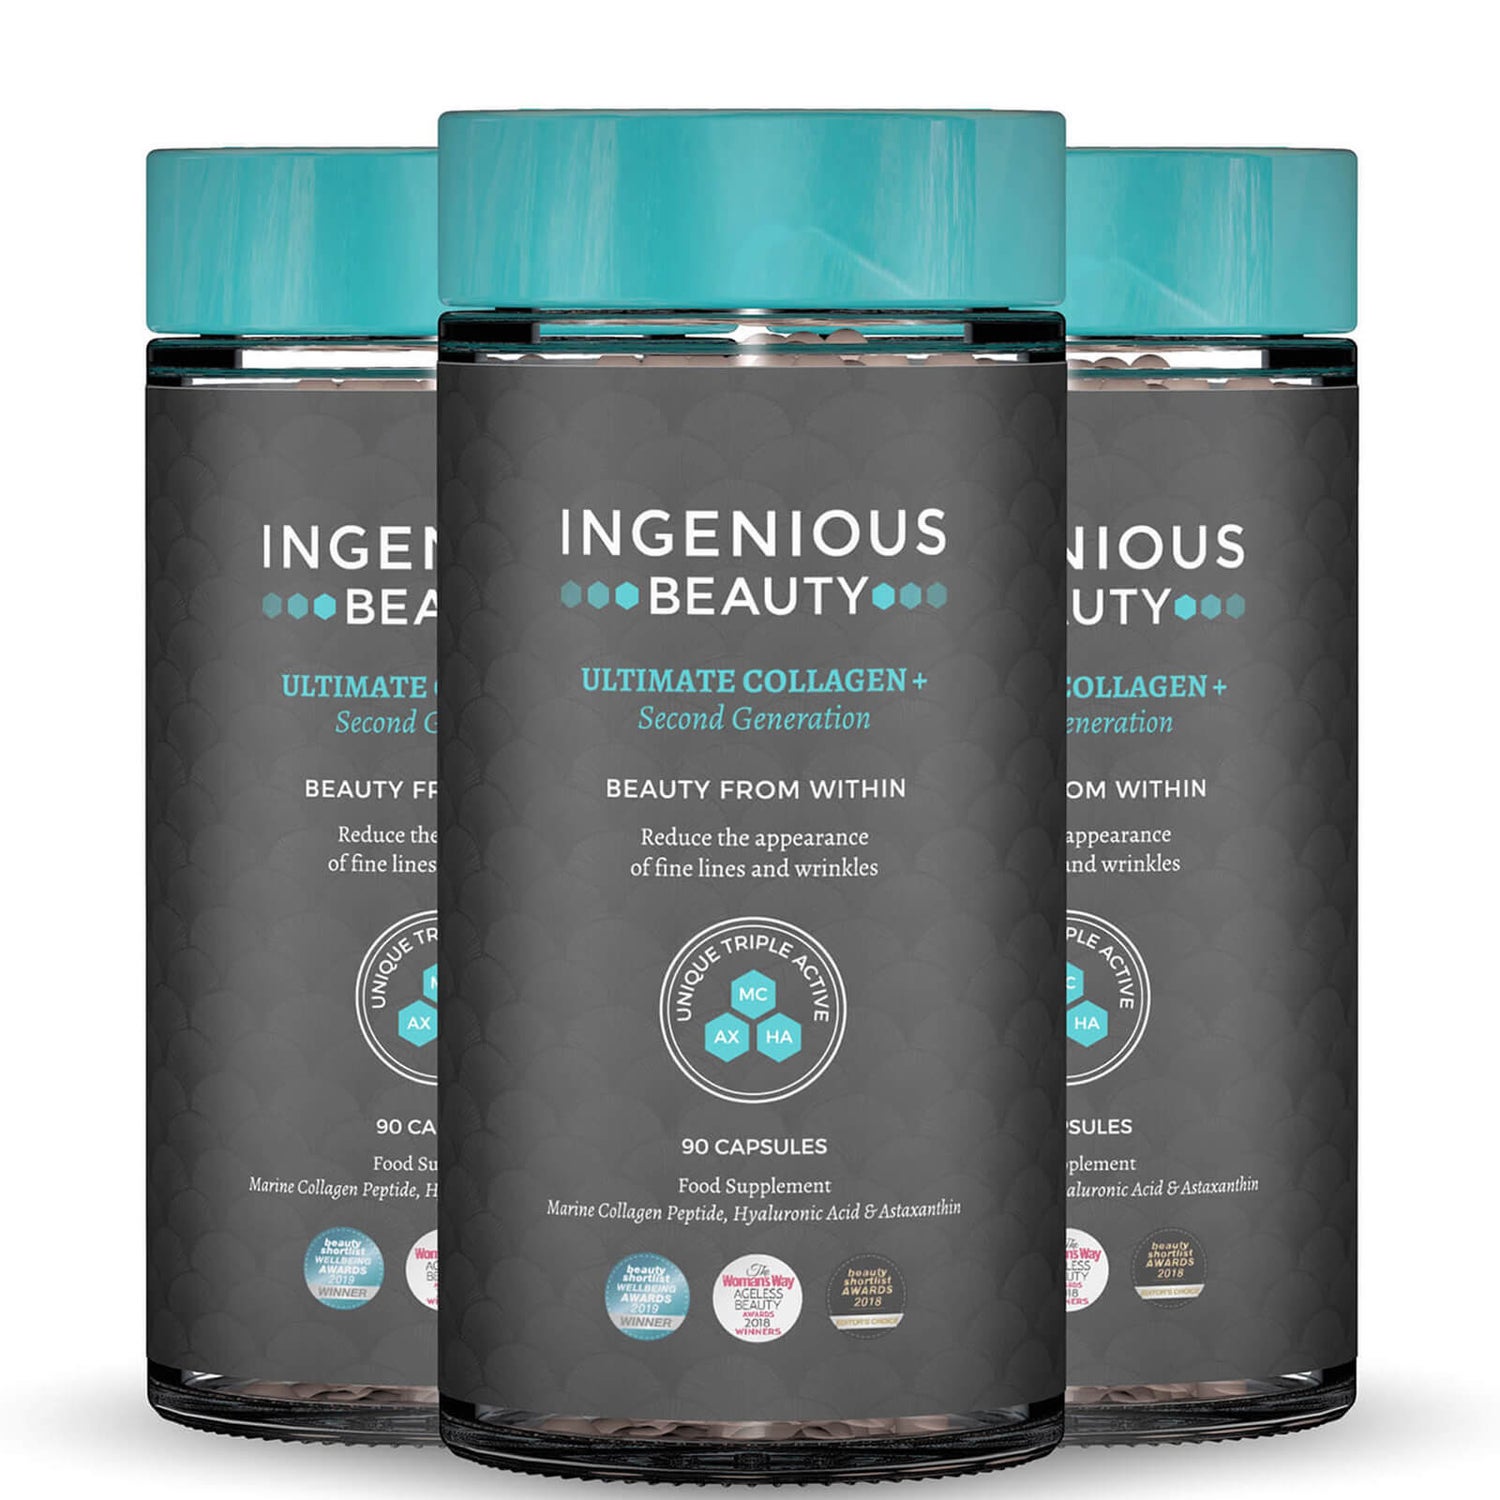 Ingenious Beauty Ultimate Collagen+ 2nd Generation (3 x 90 Capsules - Worth $178)